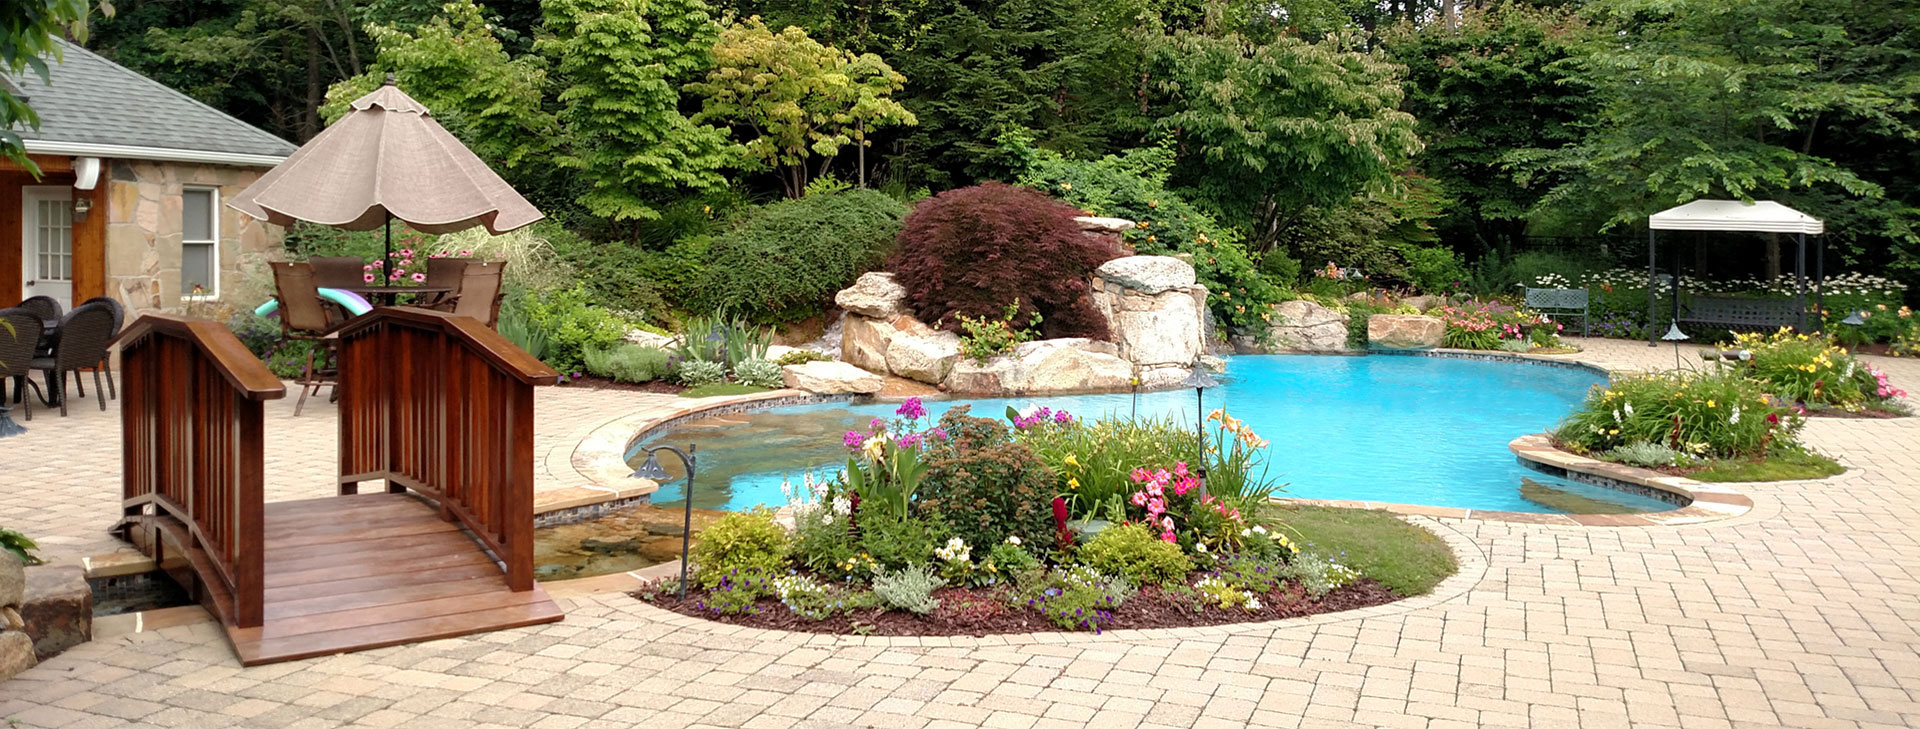 Hardscape with water feature, bridge and pool